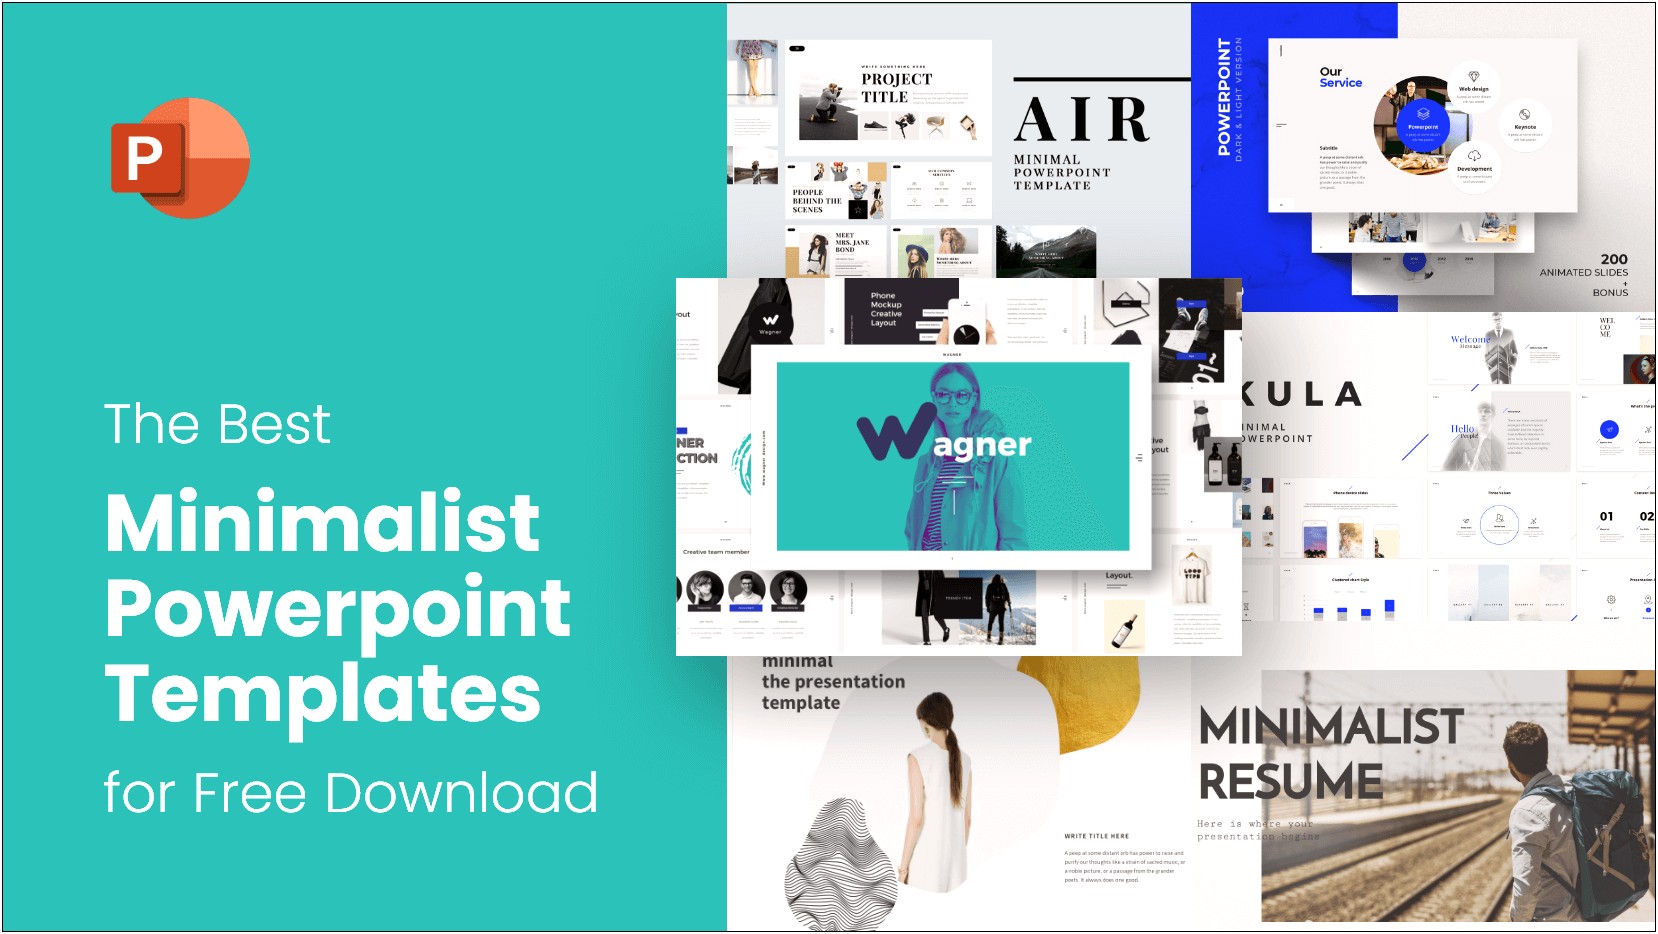 Marketing Powerpoint Templates Free Download 2019